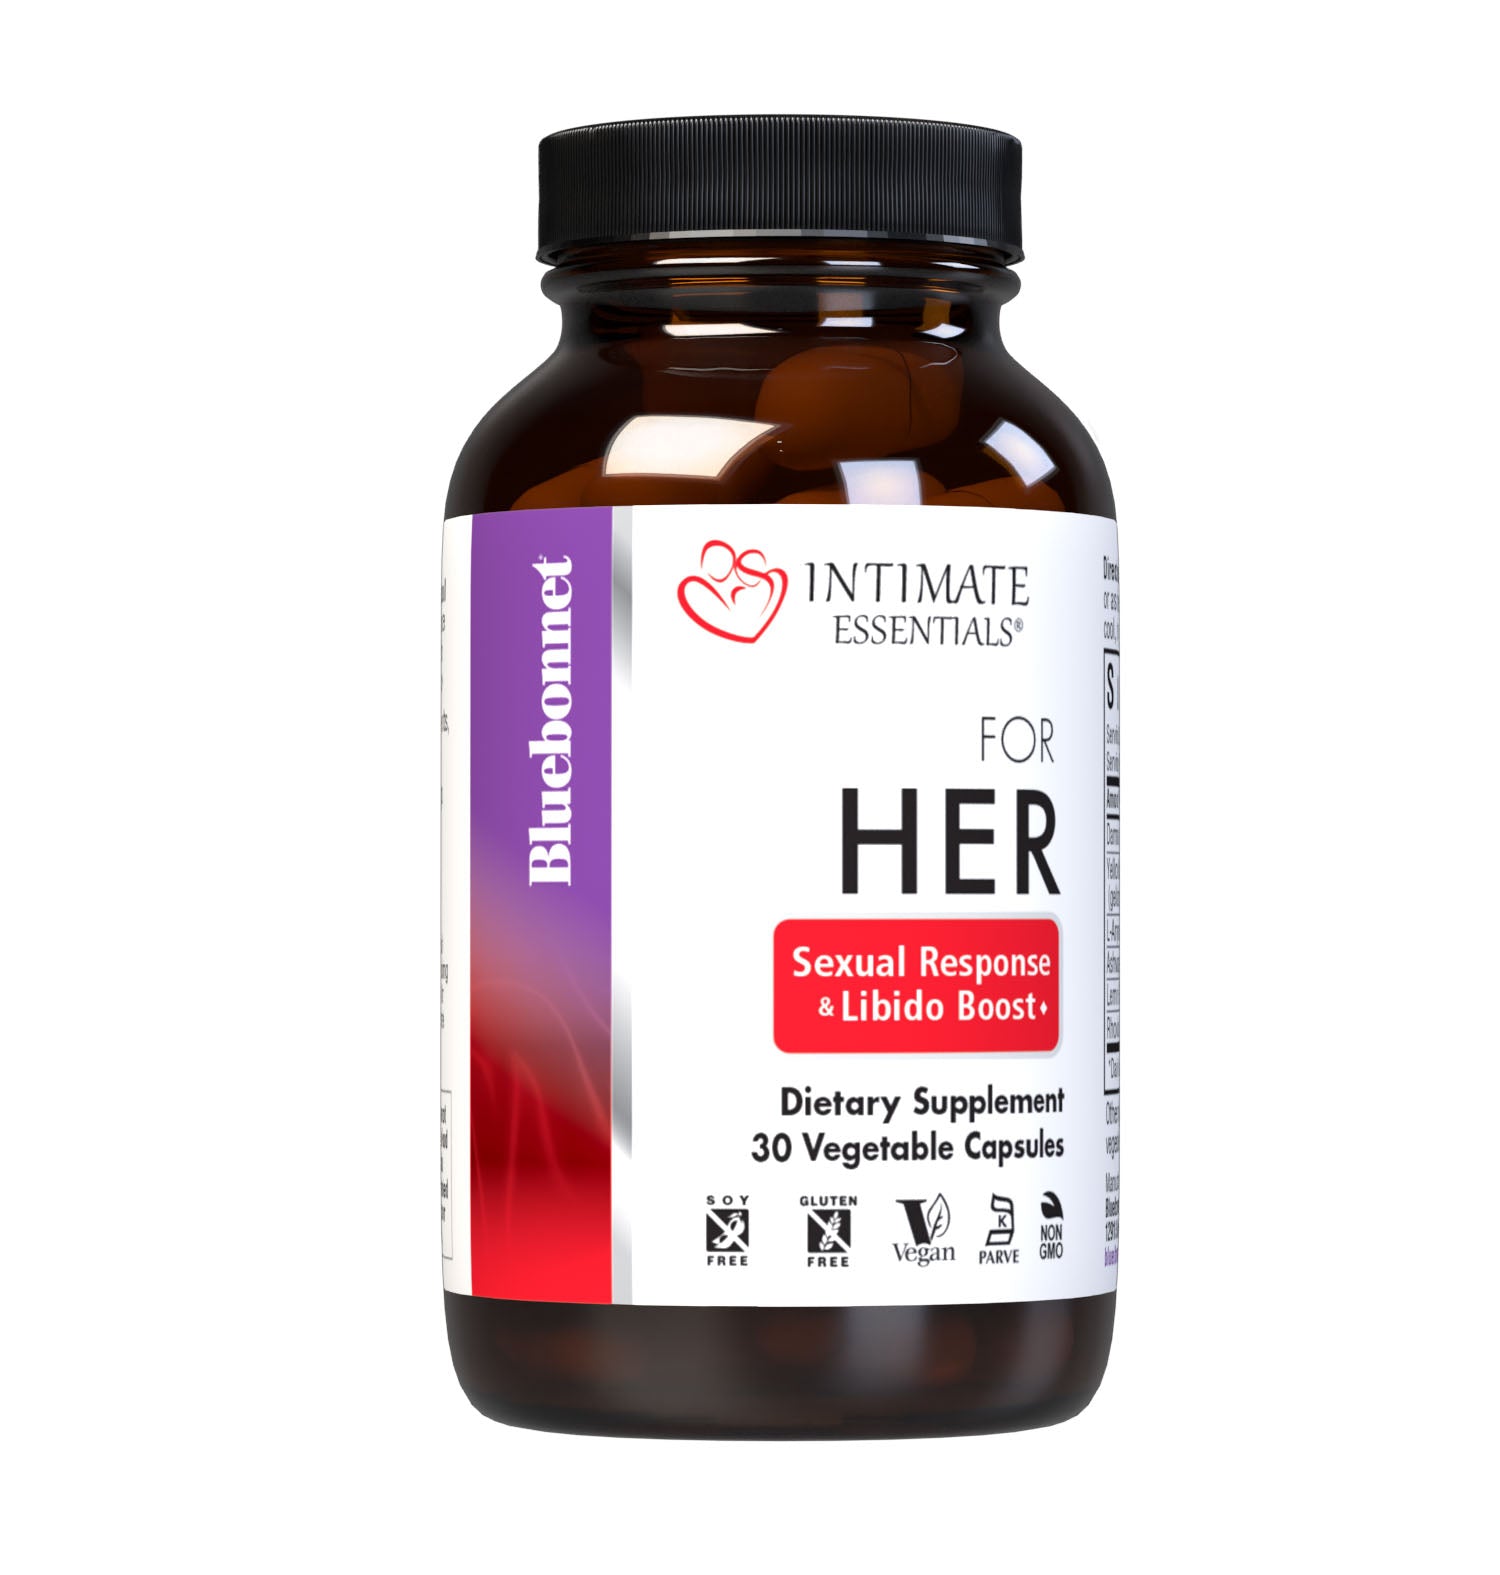 Bluebonnet’s Intimate Essentials For Her Sexual Response & Libido Boost Vegetable Capsules are specially formulated to help stimulate a woman’s sexual chemistry and intensify desire and libido.  #size_30 count